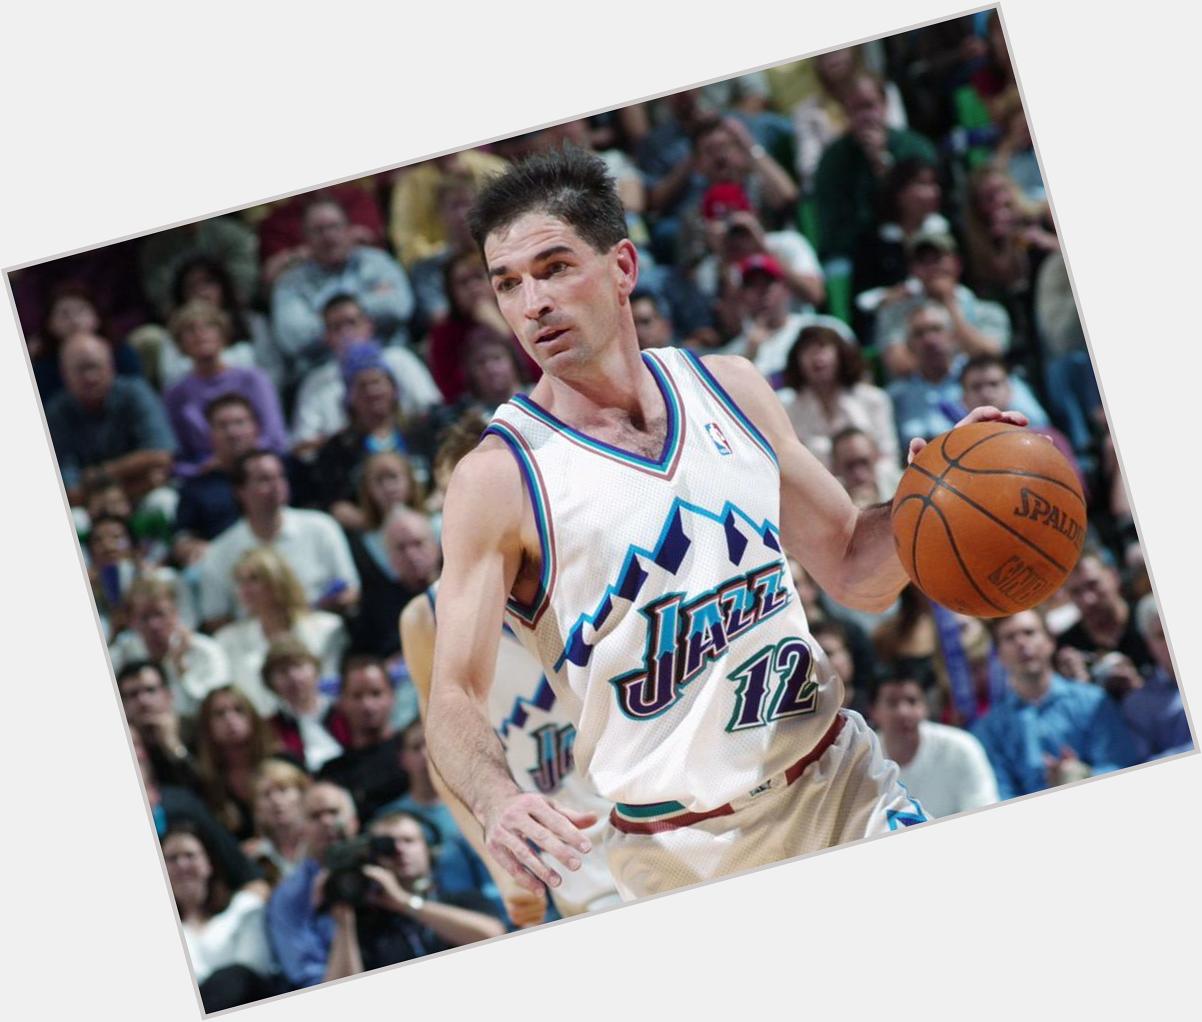 Happy Birthday to the point god himself, John Stockton. An inspiration to dads everywhere. 